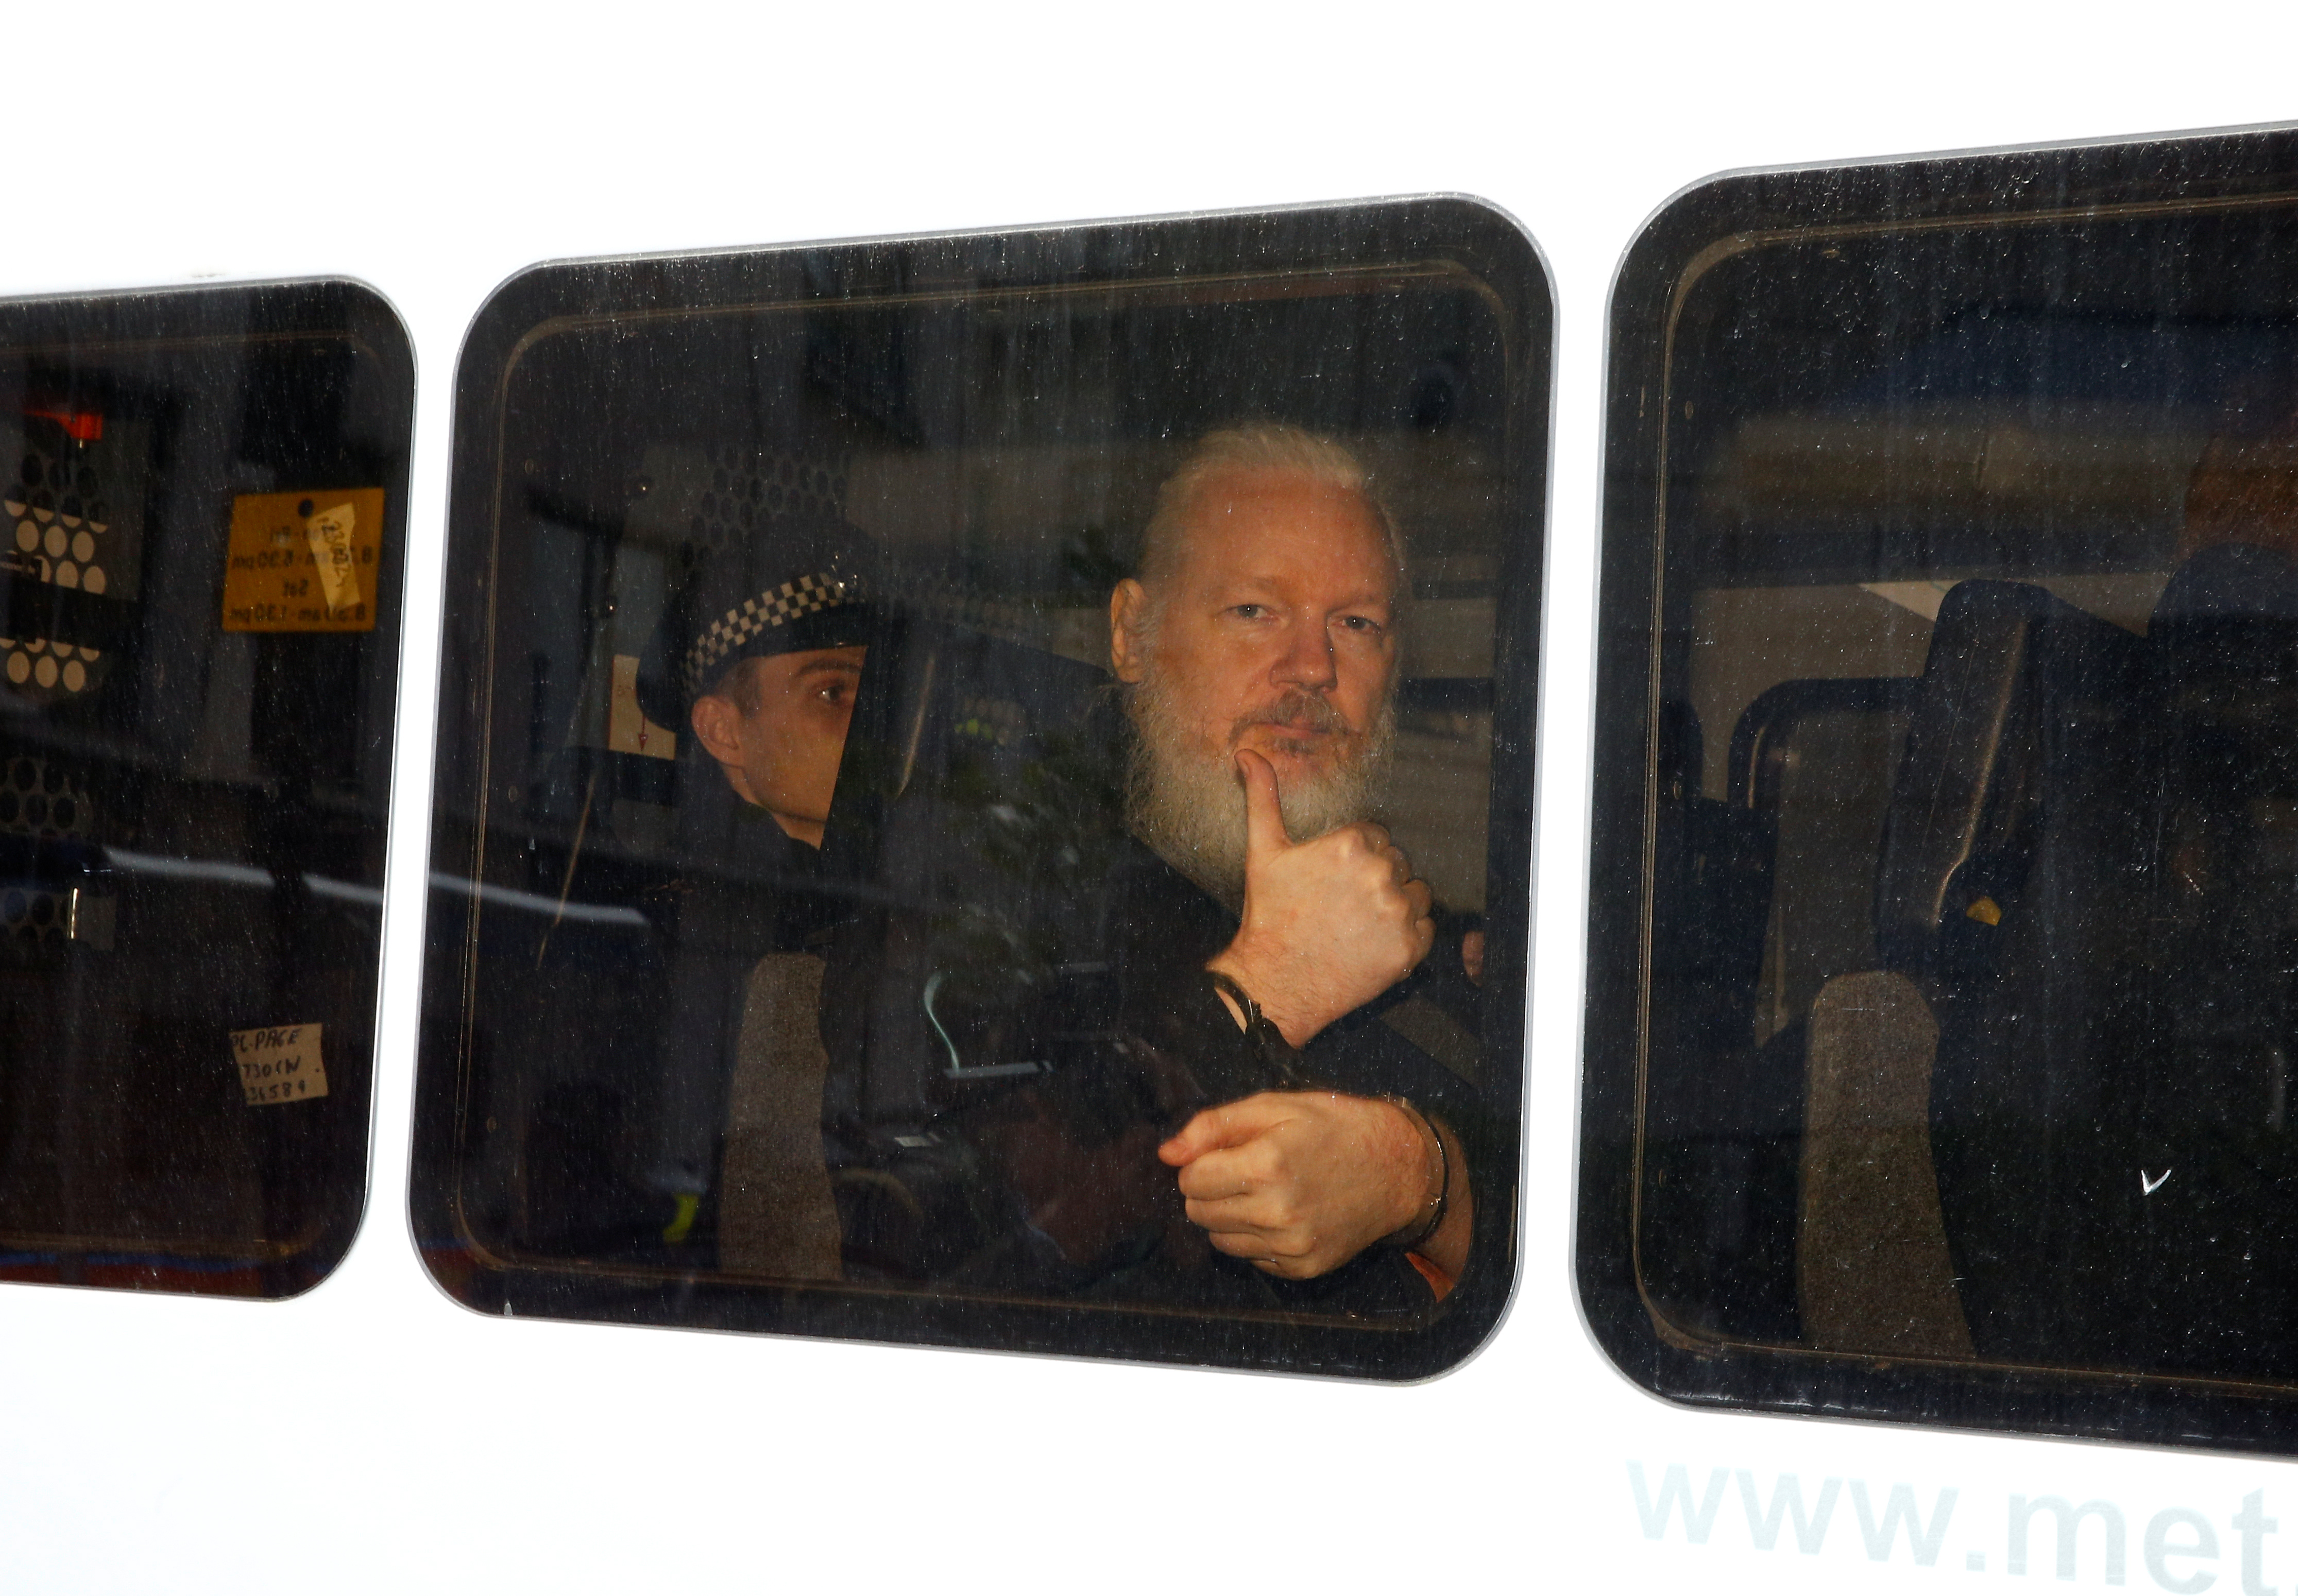 WikiLeaks founder Julian Assange is seen in a police van after was arrested by British police outside the Ecuadorian embassy in London, Britain April 11, 2019. REUTERS/Henry Nicholls TPX IMAGES OF THE DAY